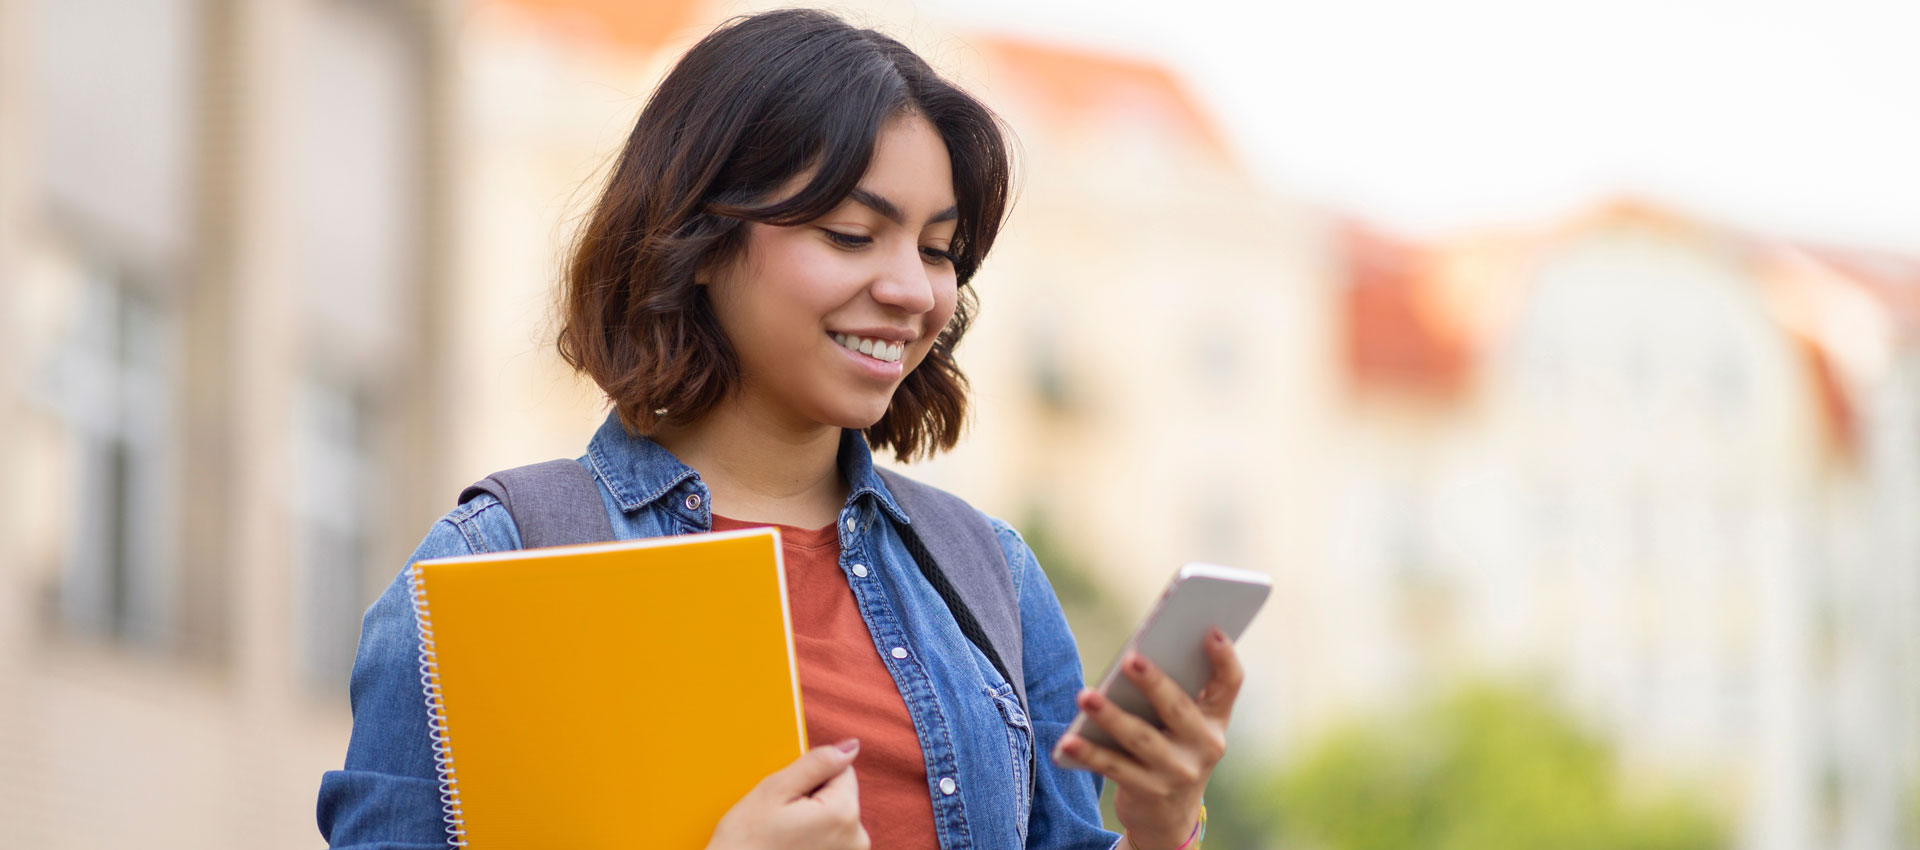 Smiling student holding mobile phone